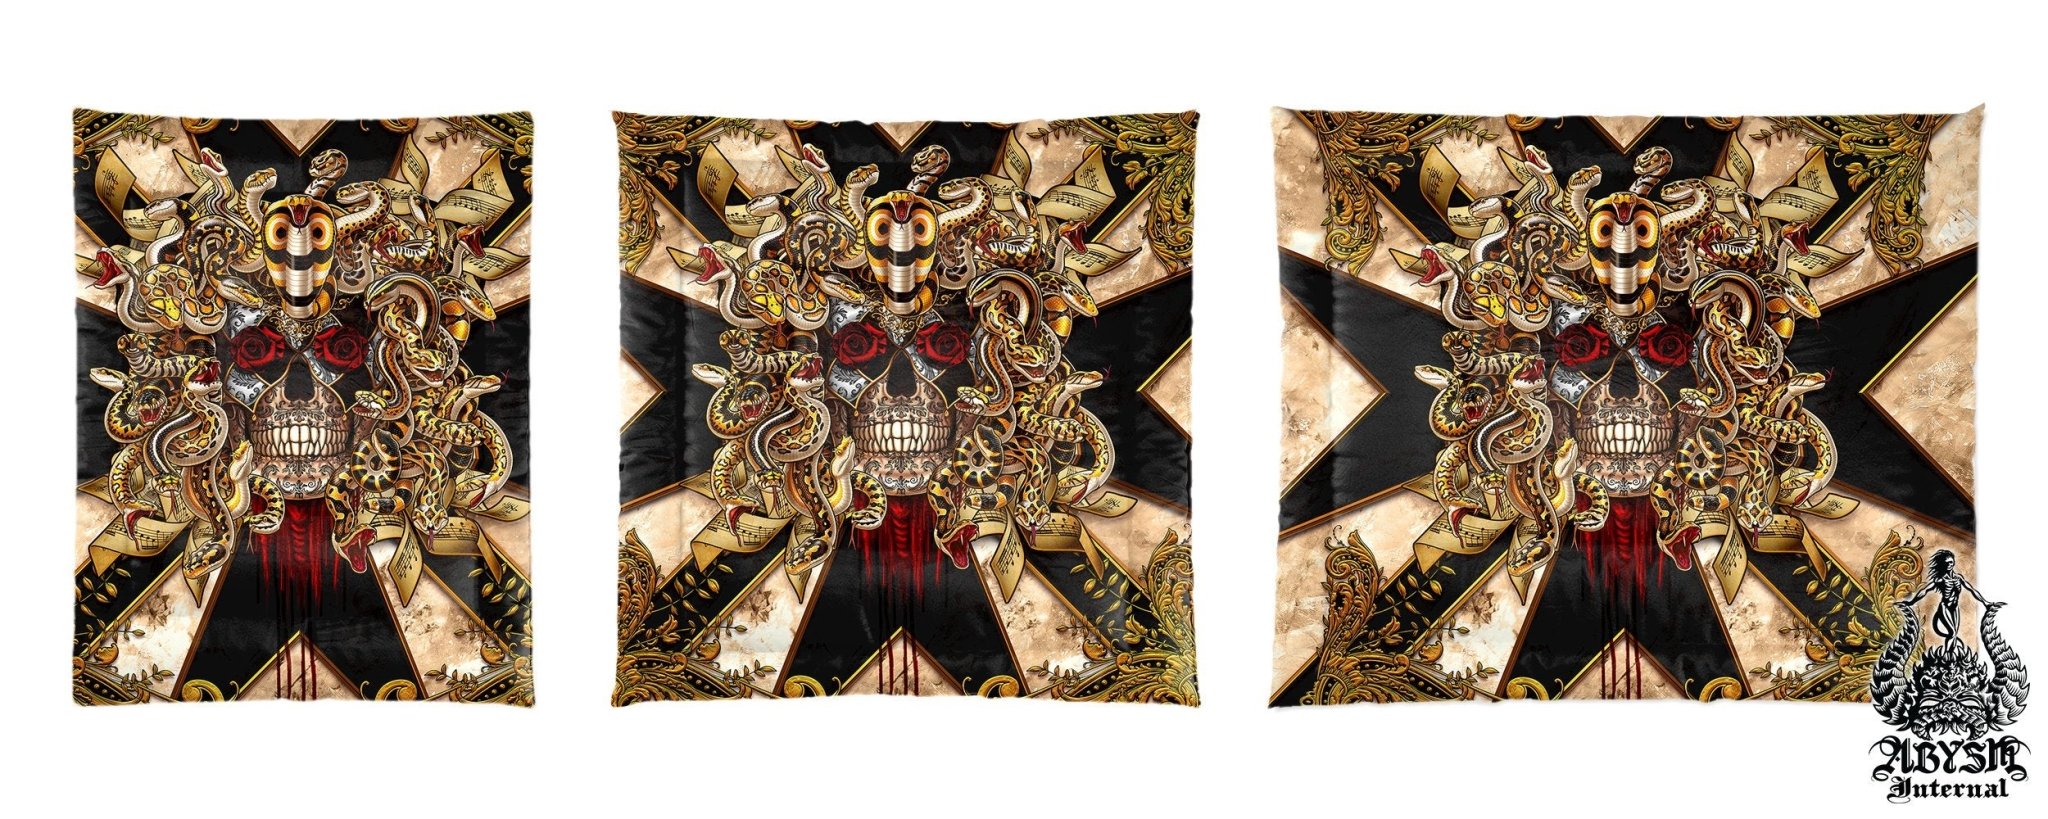 Skull Bedding Set, Comforter and Duvet, Gothic Carnival Bed Cover and Bedroom Decor, King, Queen and Twin Size - Black Harlequin Medusa - Abysm Internal